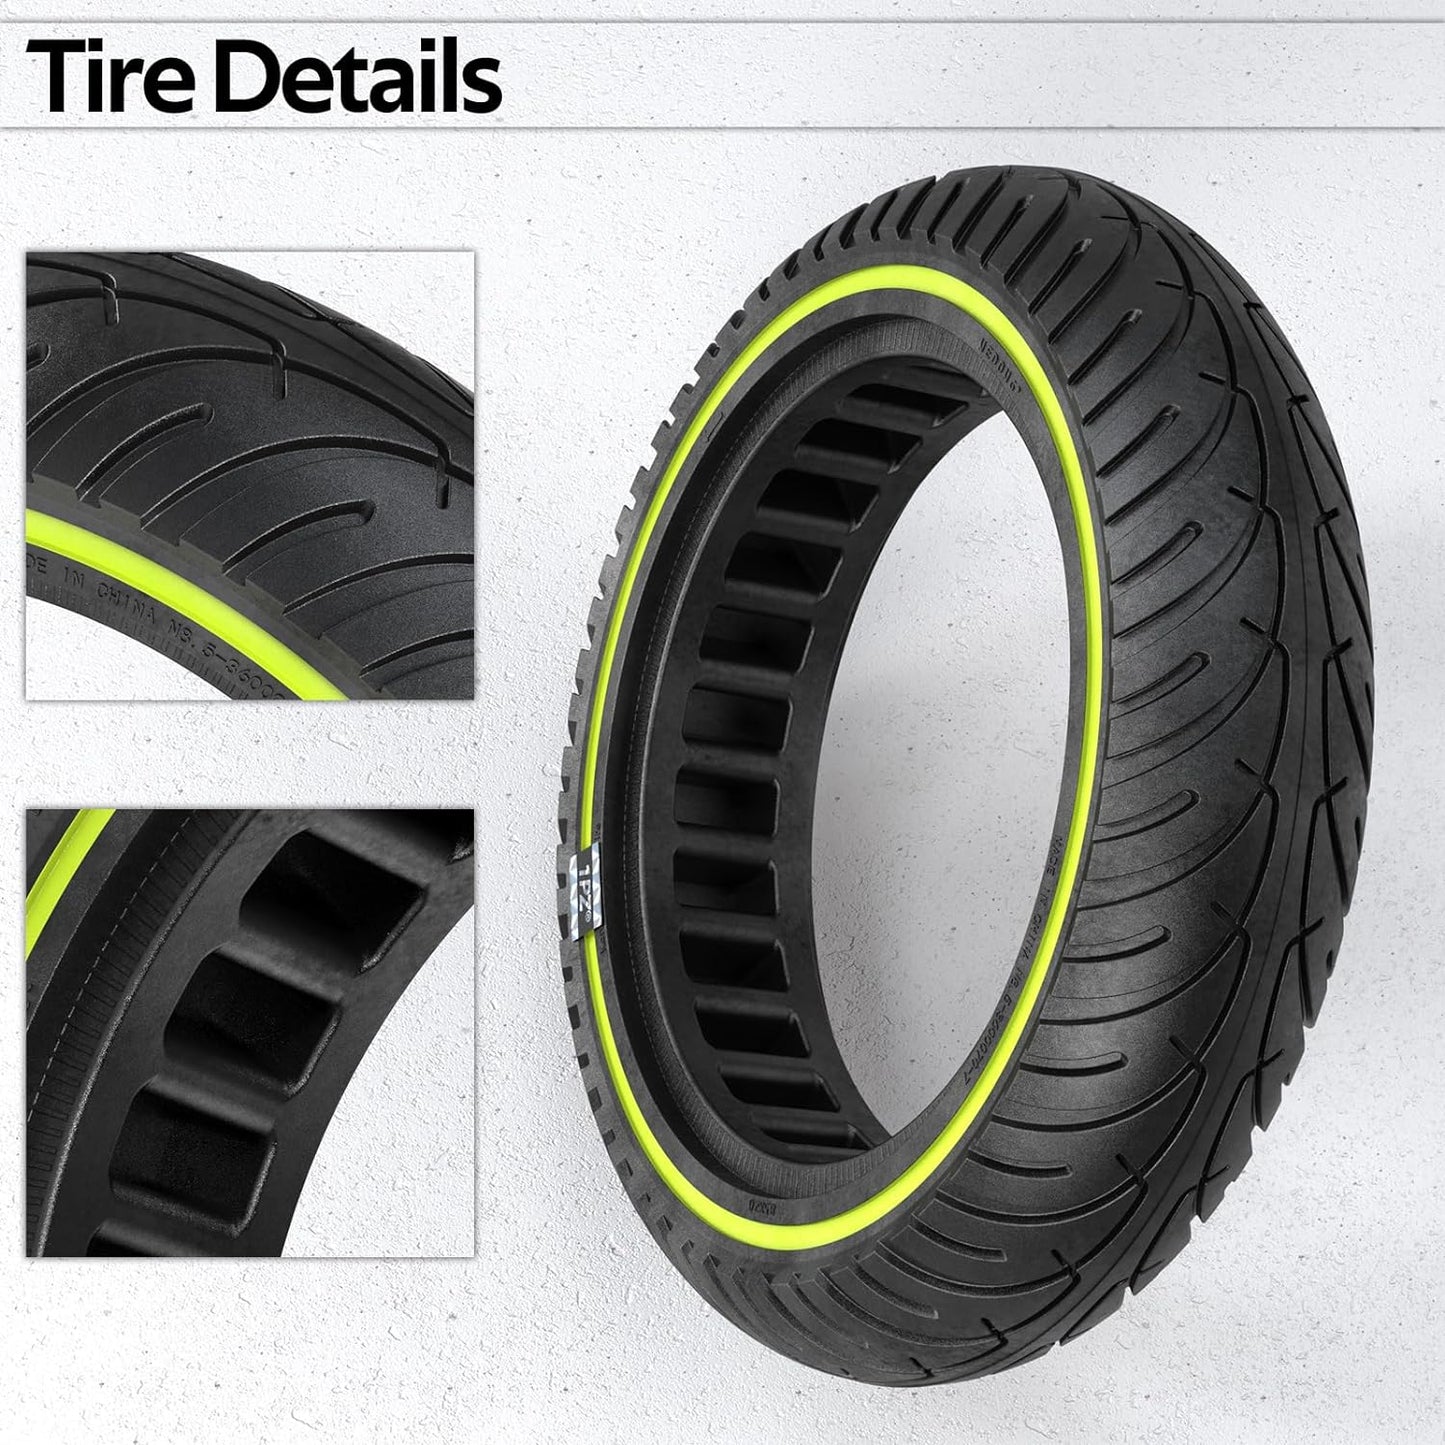 1PZ SV0-P2Q 8 1/2 x 2 Tire 8.5 inch Solid Tires Replacement for Gotrax GXL V2 XR Xiaomi M365 1S Pro 2 Electric Scooter